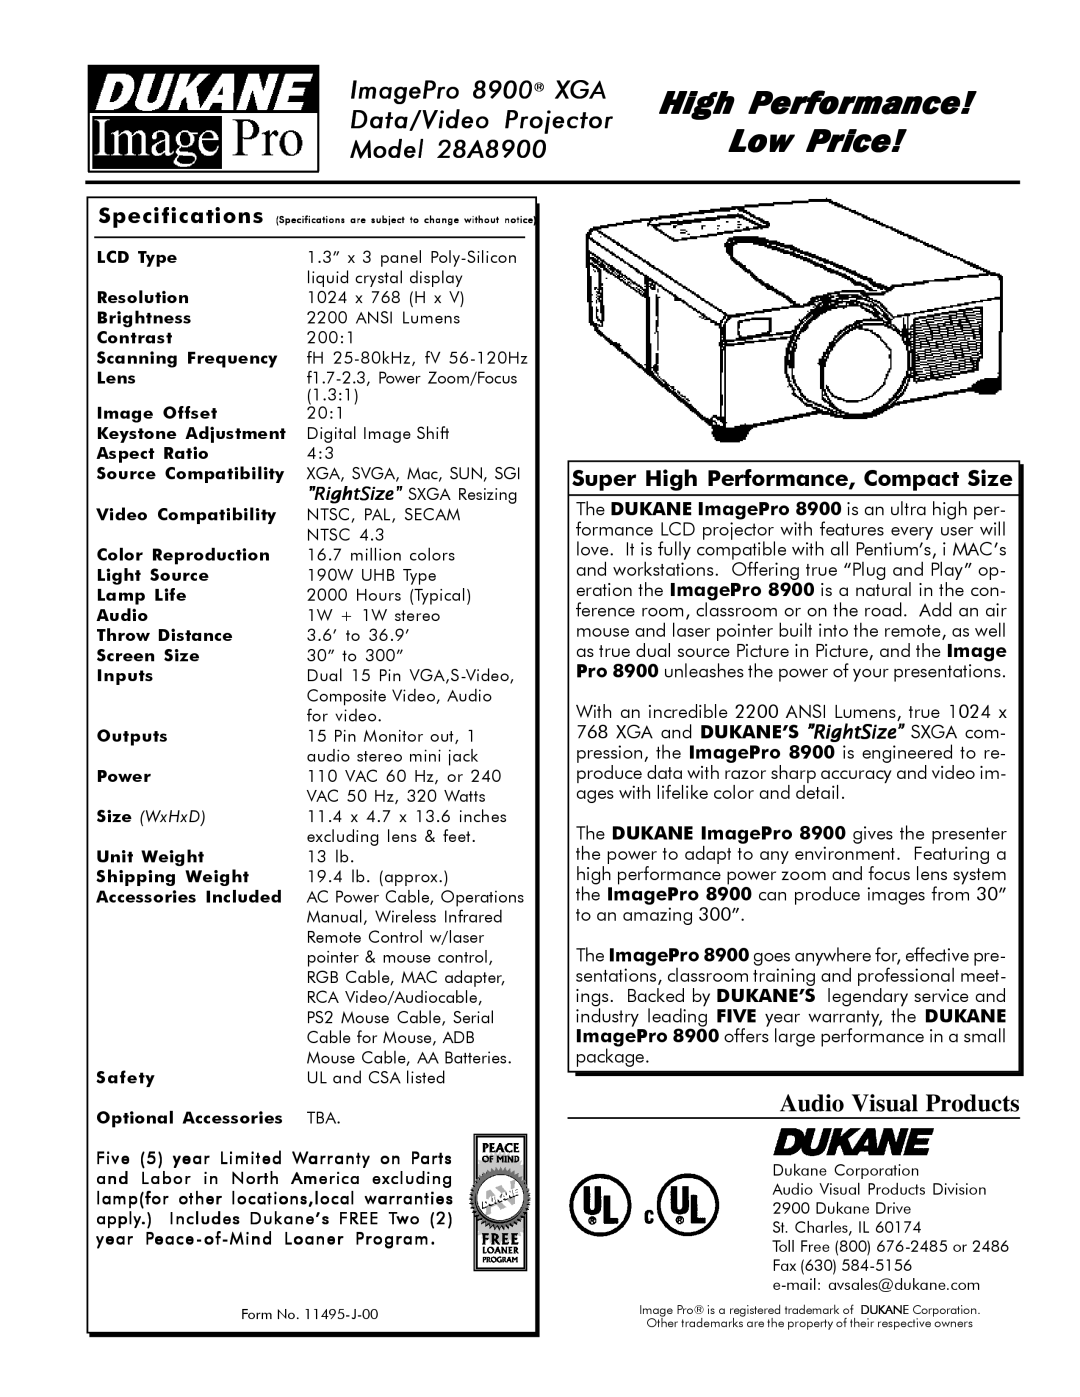 Dukane High Performance Low Price, ImagePro 8900 XGA Data/Video Projector Model 28A8900, Audio Visual Products 